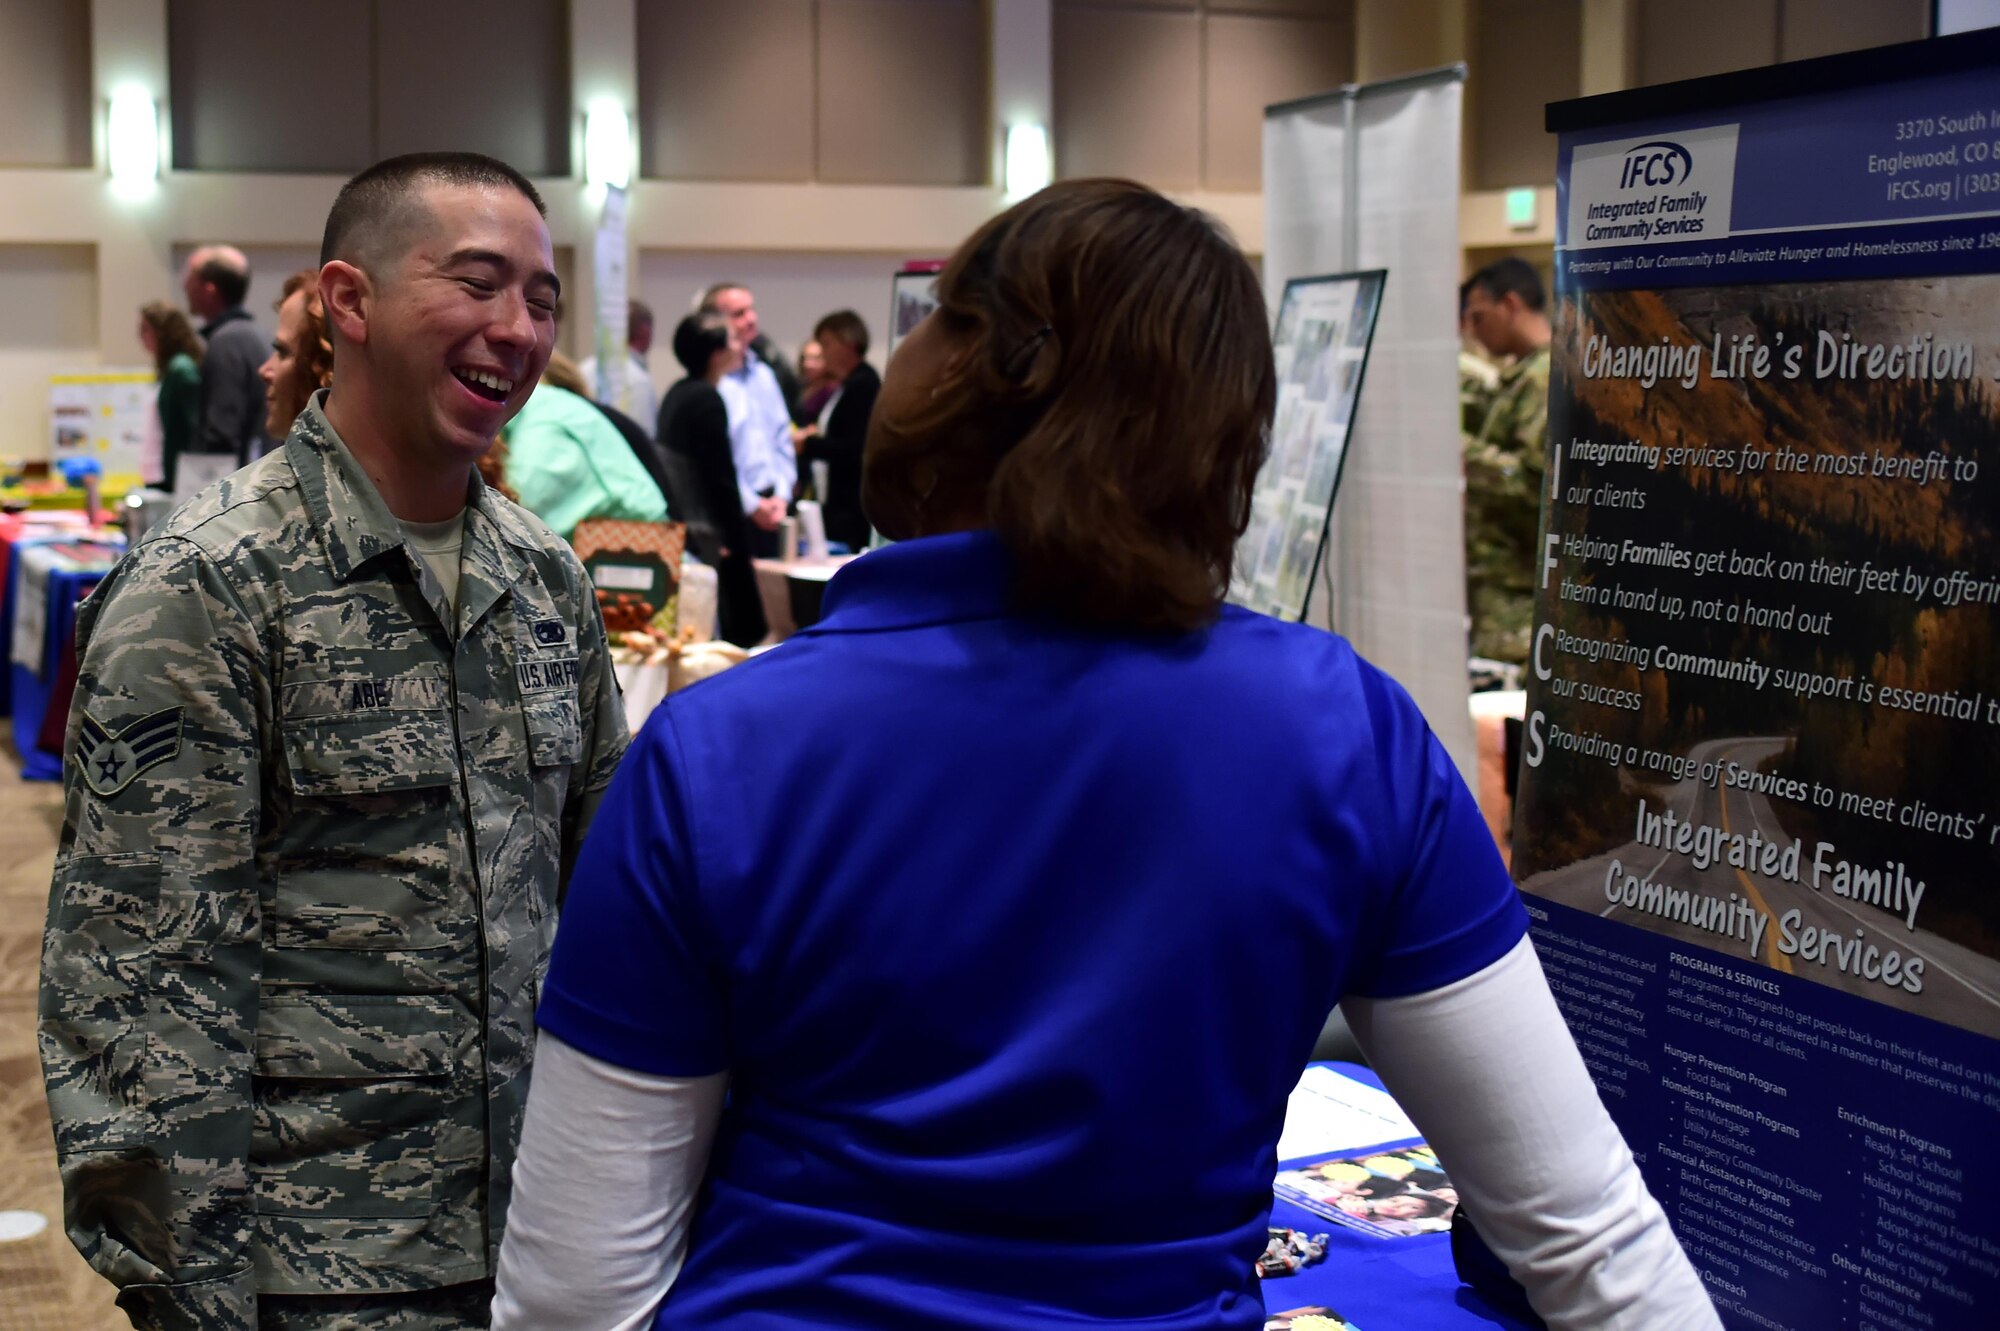 Senior Airman Edward Abe, 302nd Maintenance Squadron communication navigation technician, speaks with a representative from Integrated Family Community Services during the Combined Federal Campaign fair Oct. 12, 2016, on Buckley Air Force Base. Team Buckley members are now able to donate to the organization of their choice. (Air Force photo by Airman Holden S. Faul/Released)